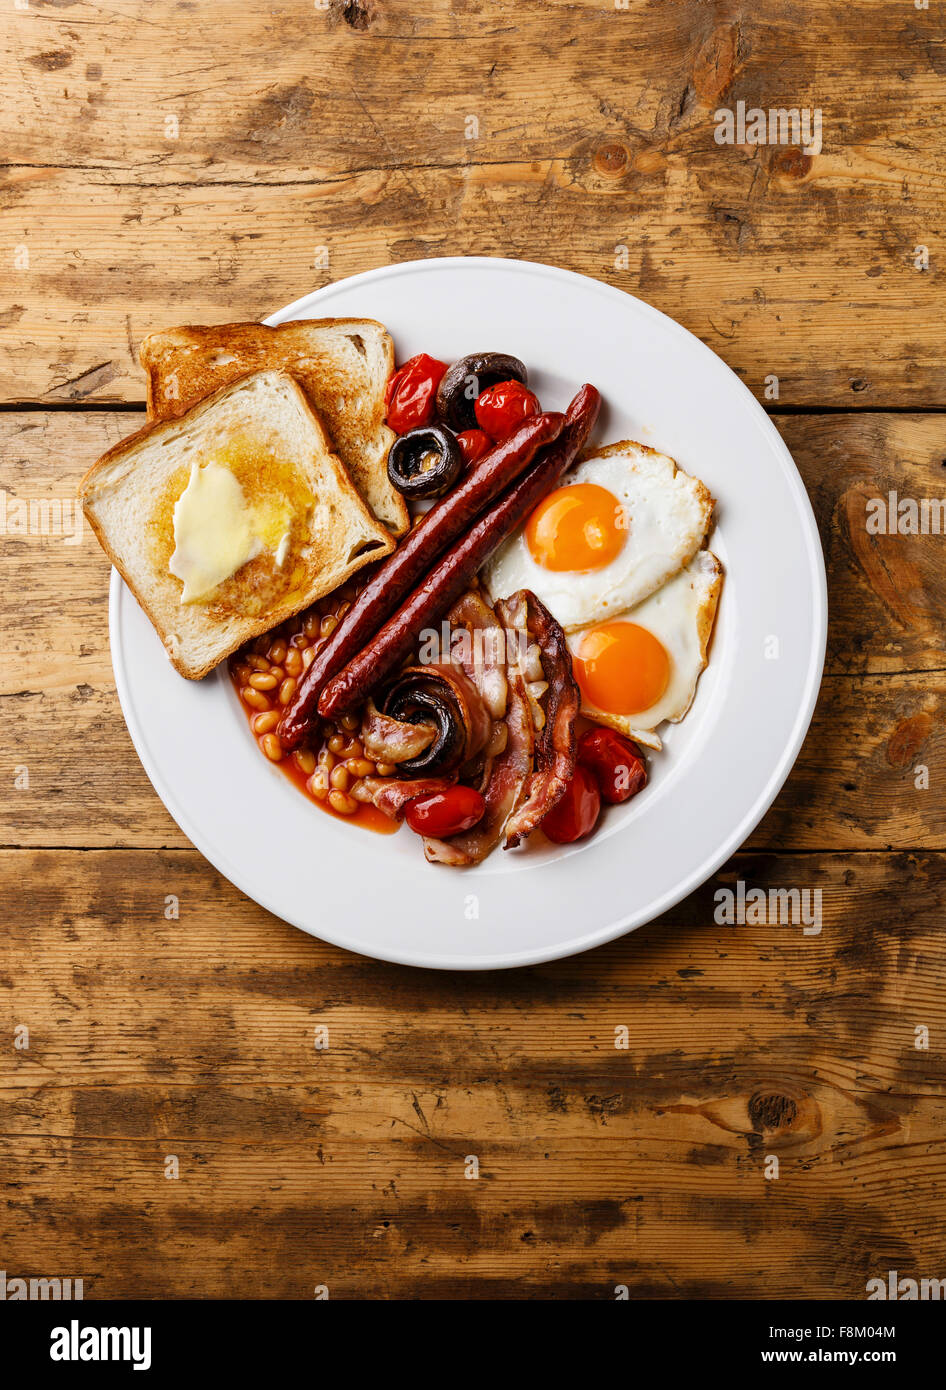 Full English Breakfast with fried eggs, sausages, bacon, beans, toasts, tomatoes and mushrooms on wooden background Stock Photo